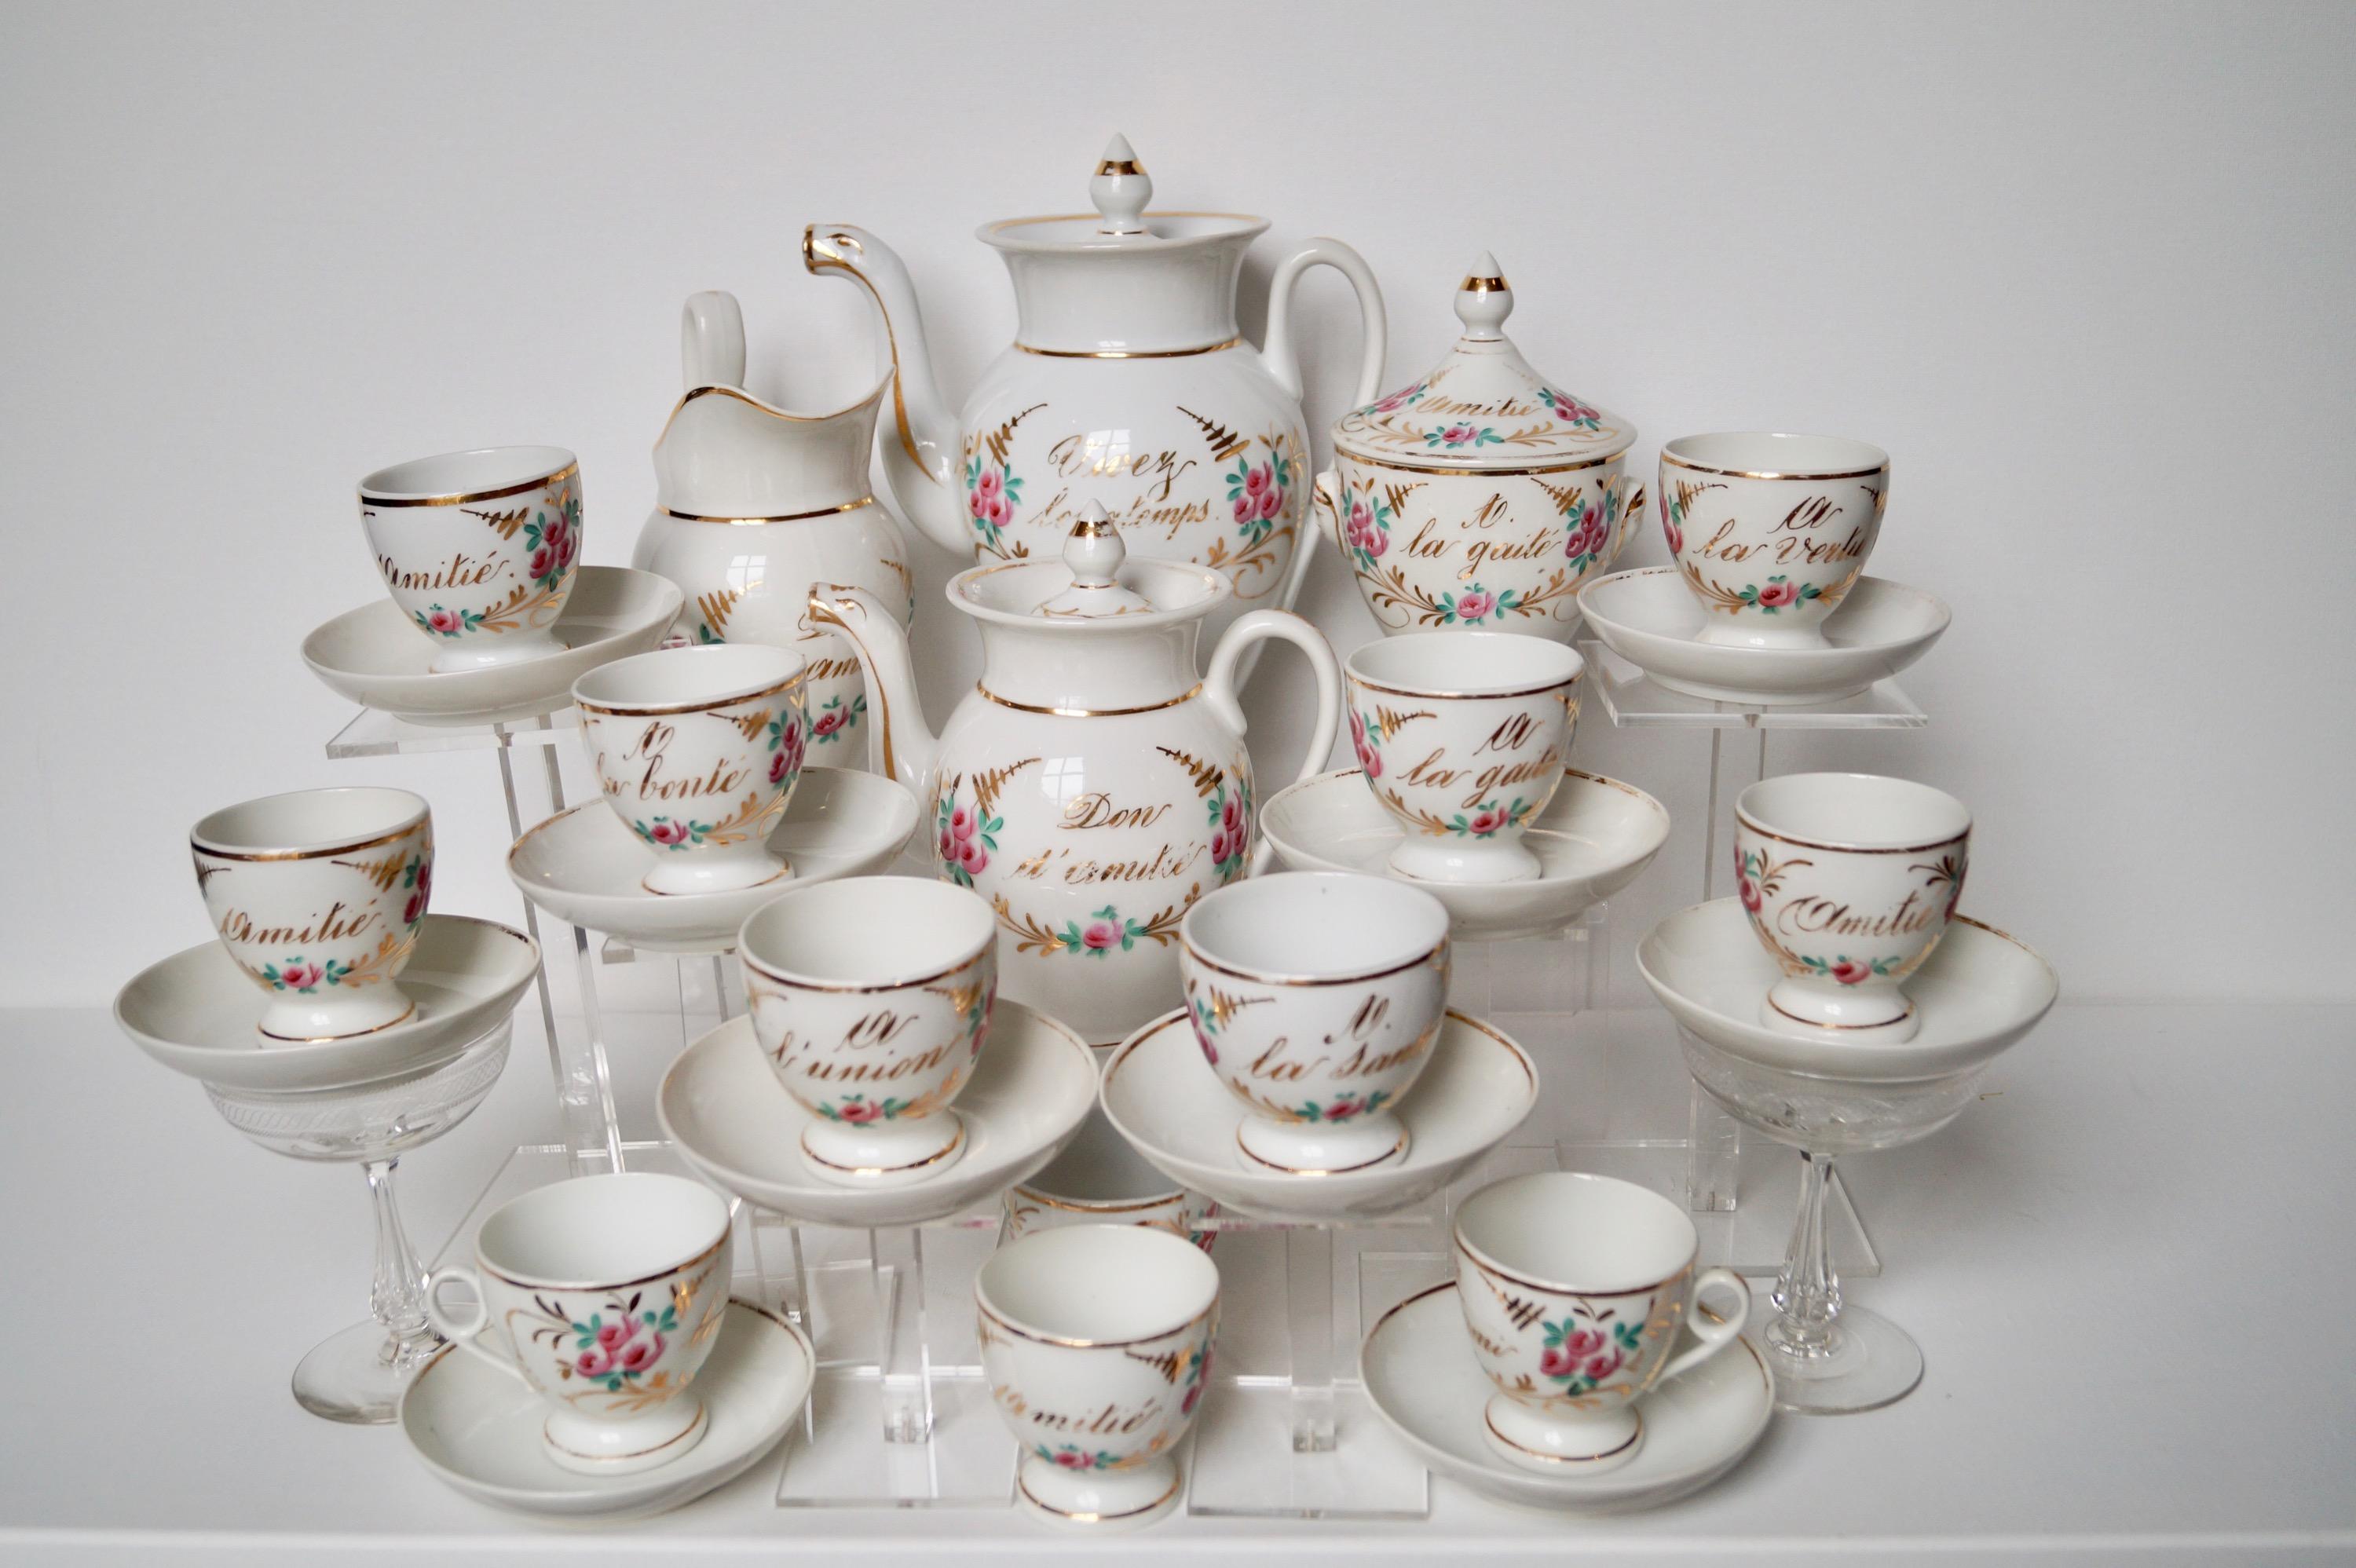 Particular and Rare Old Paris Hand-Painted Porcelain Coffee Tea Service, France For Sale 3